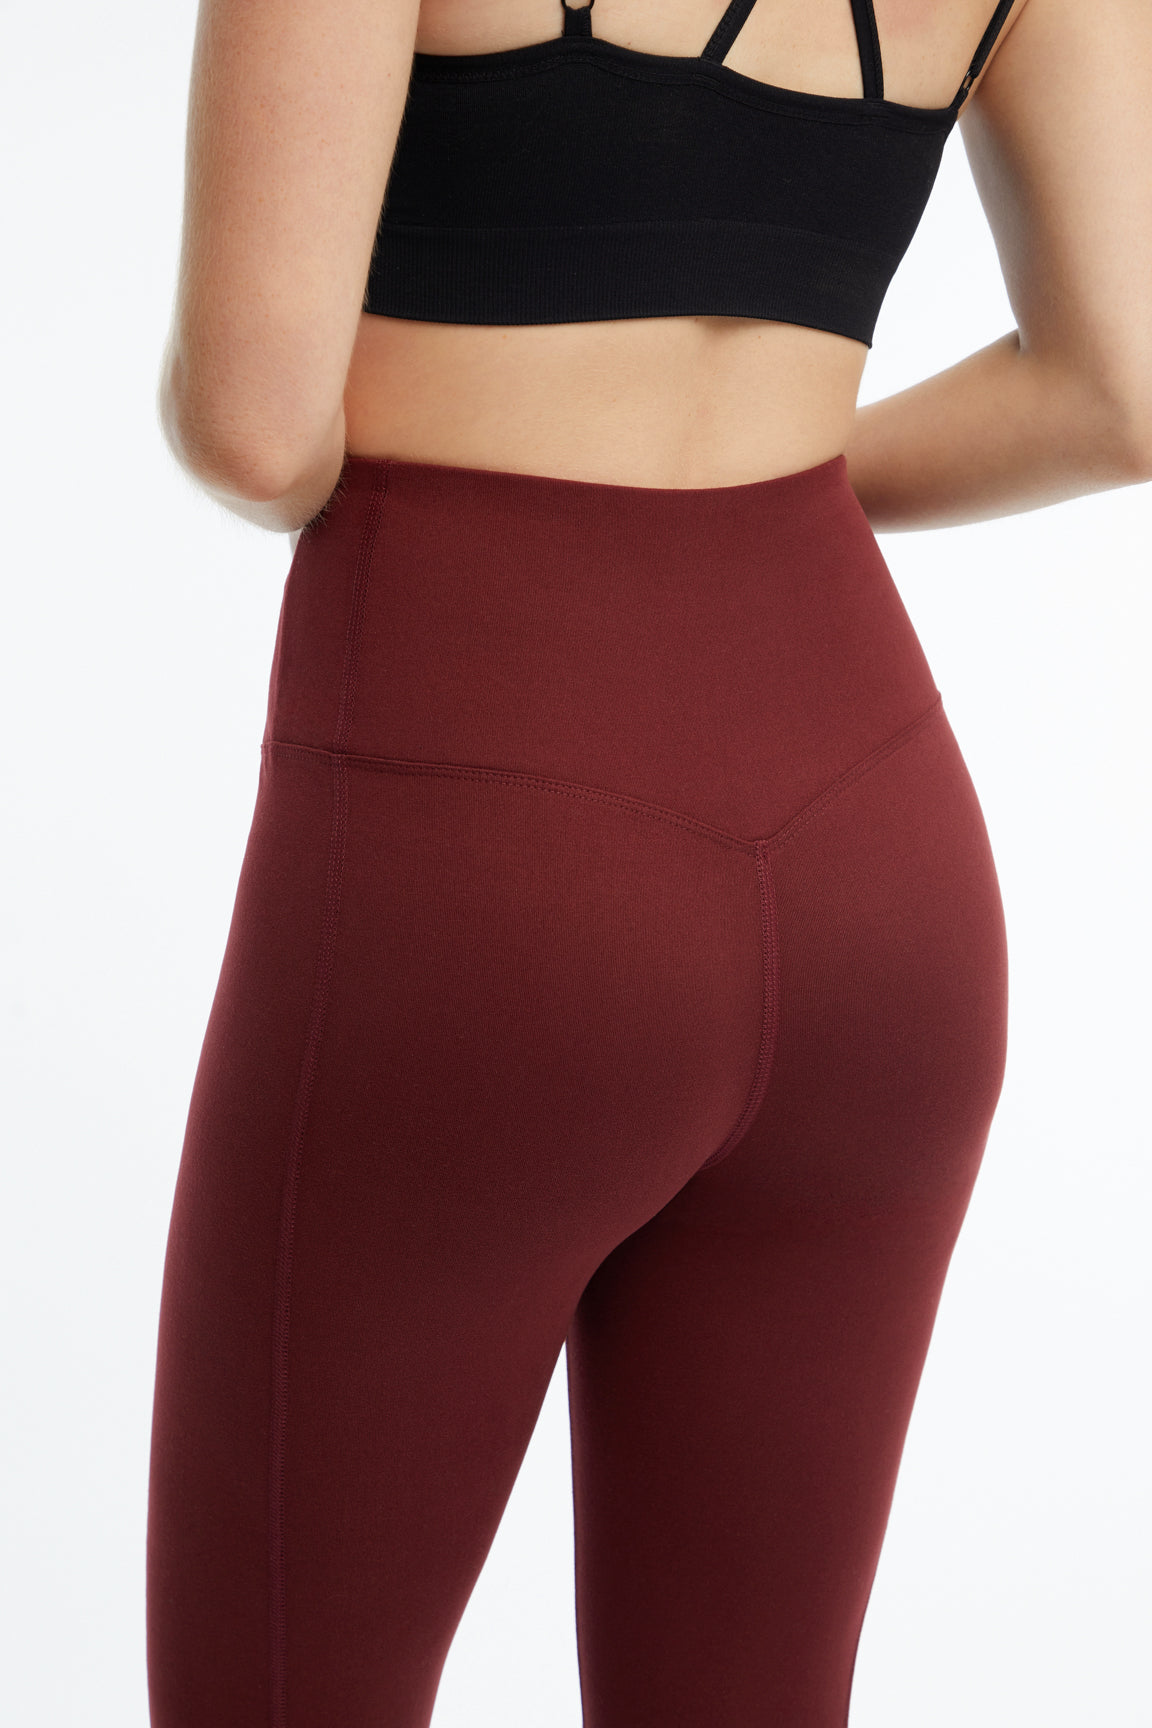 Apana High Waisted Ultra Cozy Leggings with Pockets Cranberry Maroon  Women's S